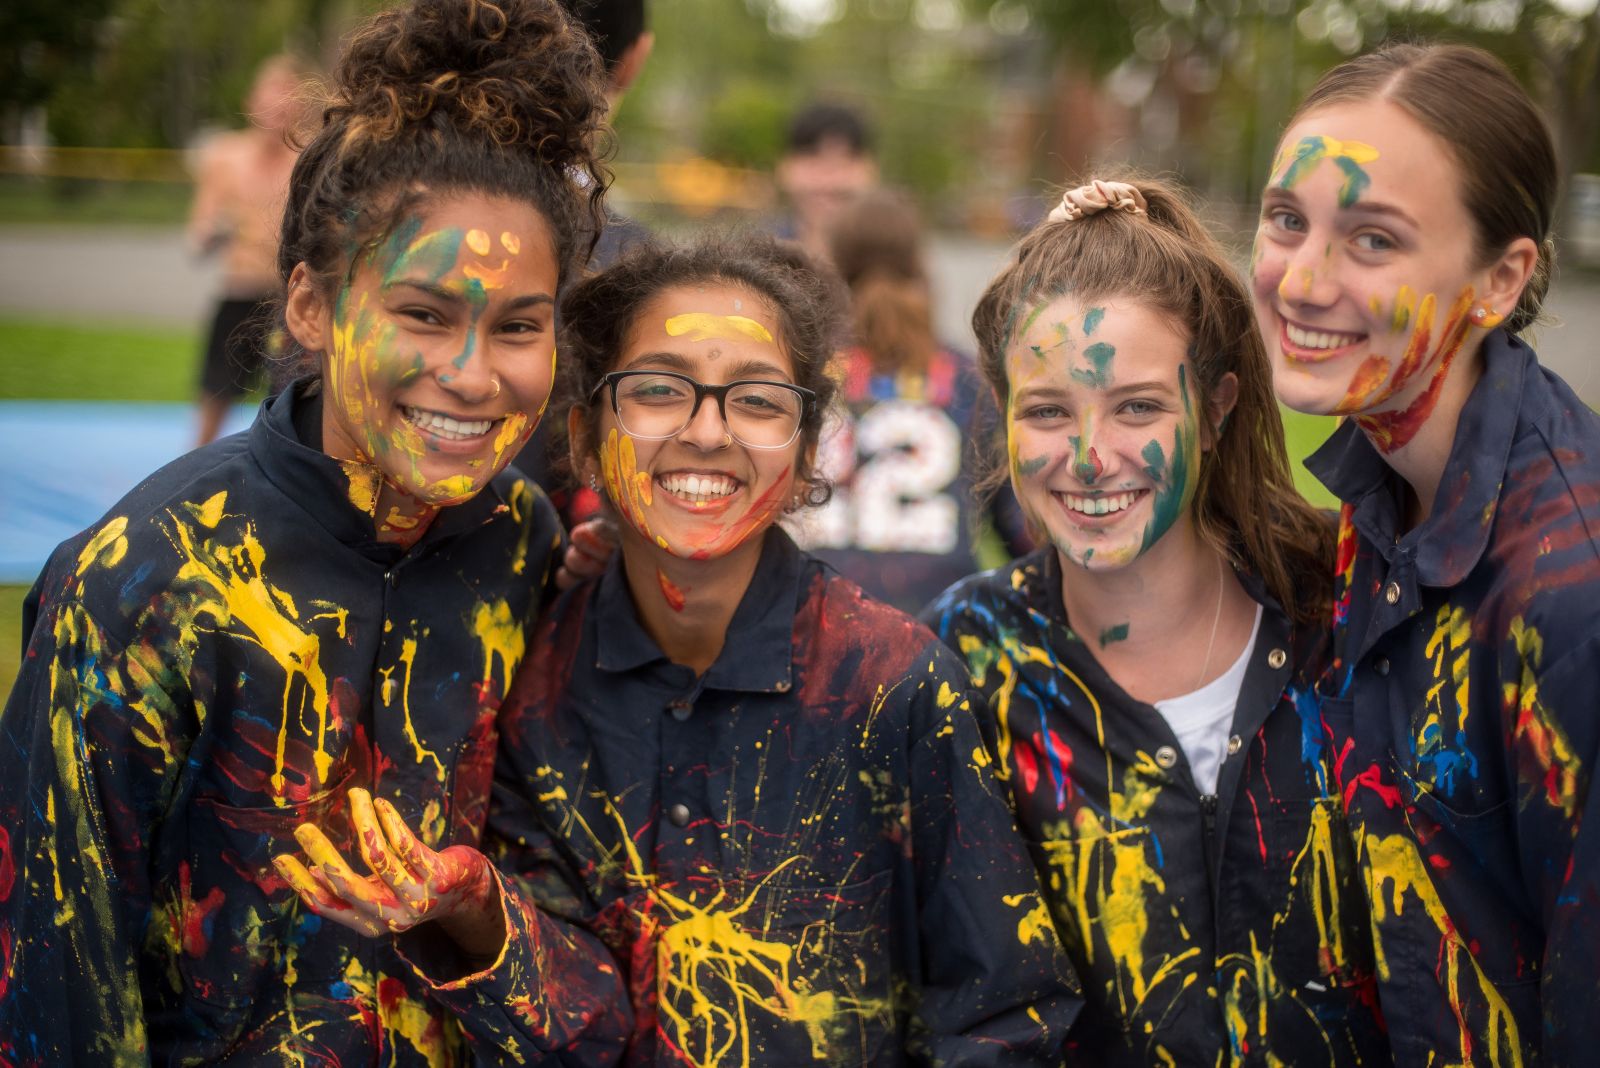 Queen's students during Frosh Week with painted coveralls